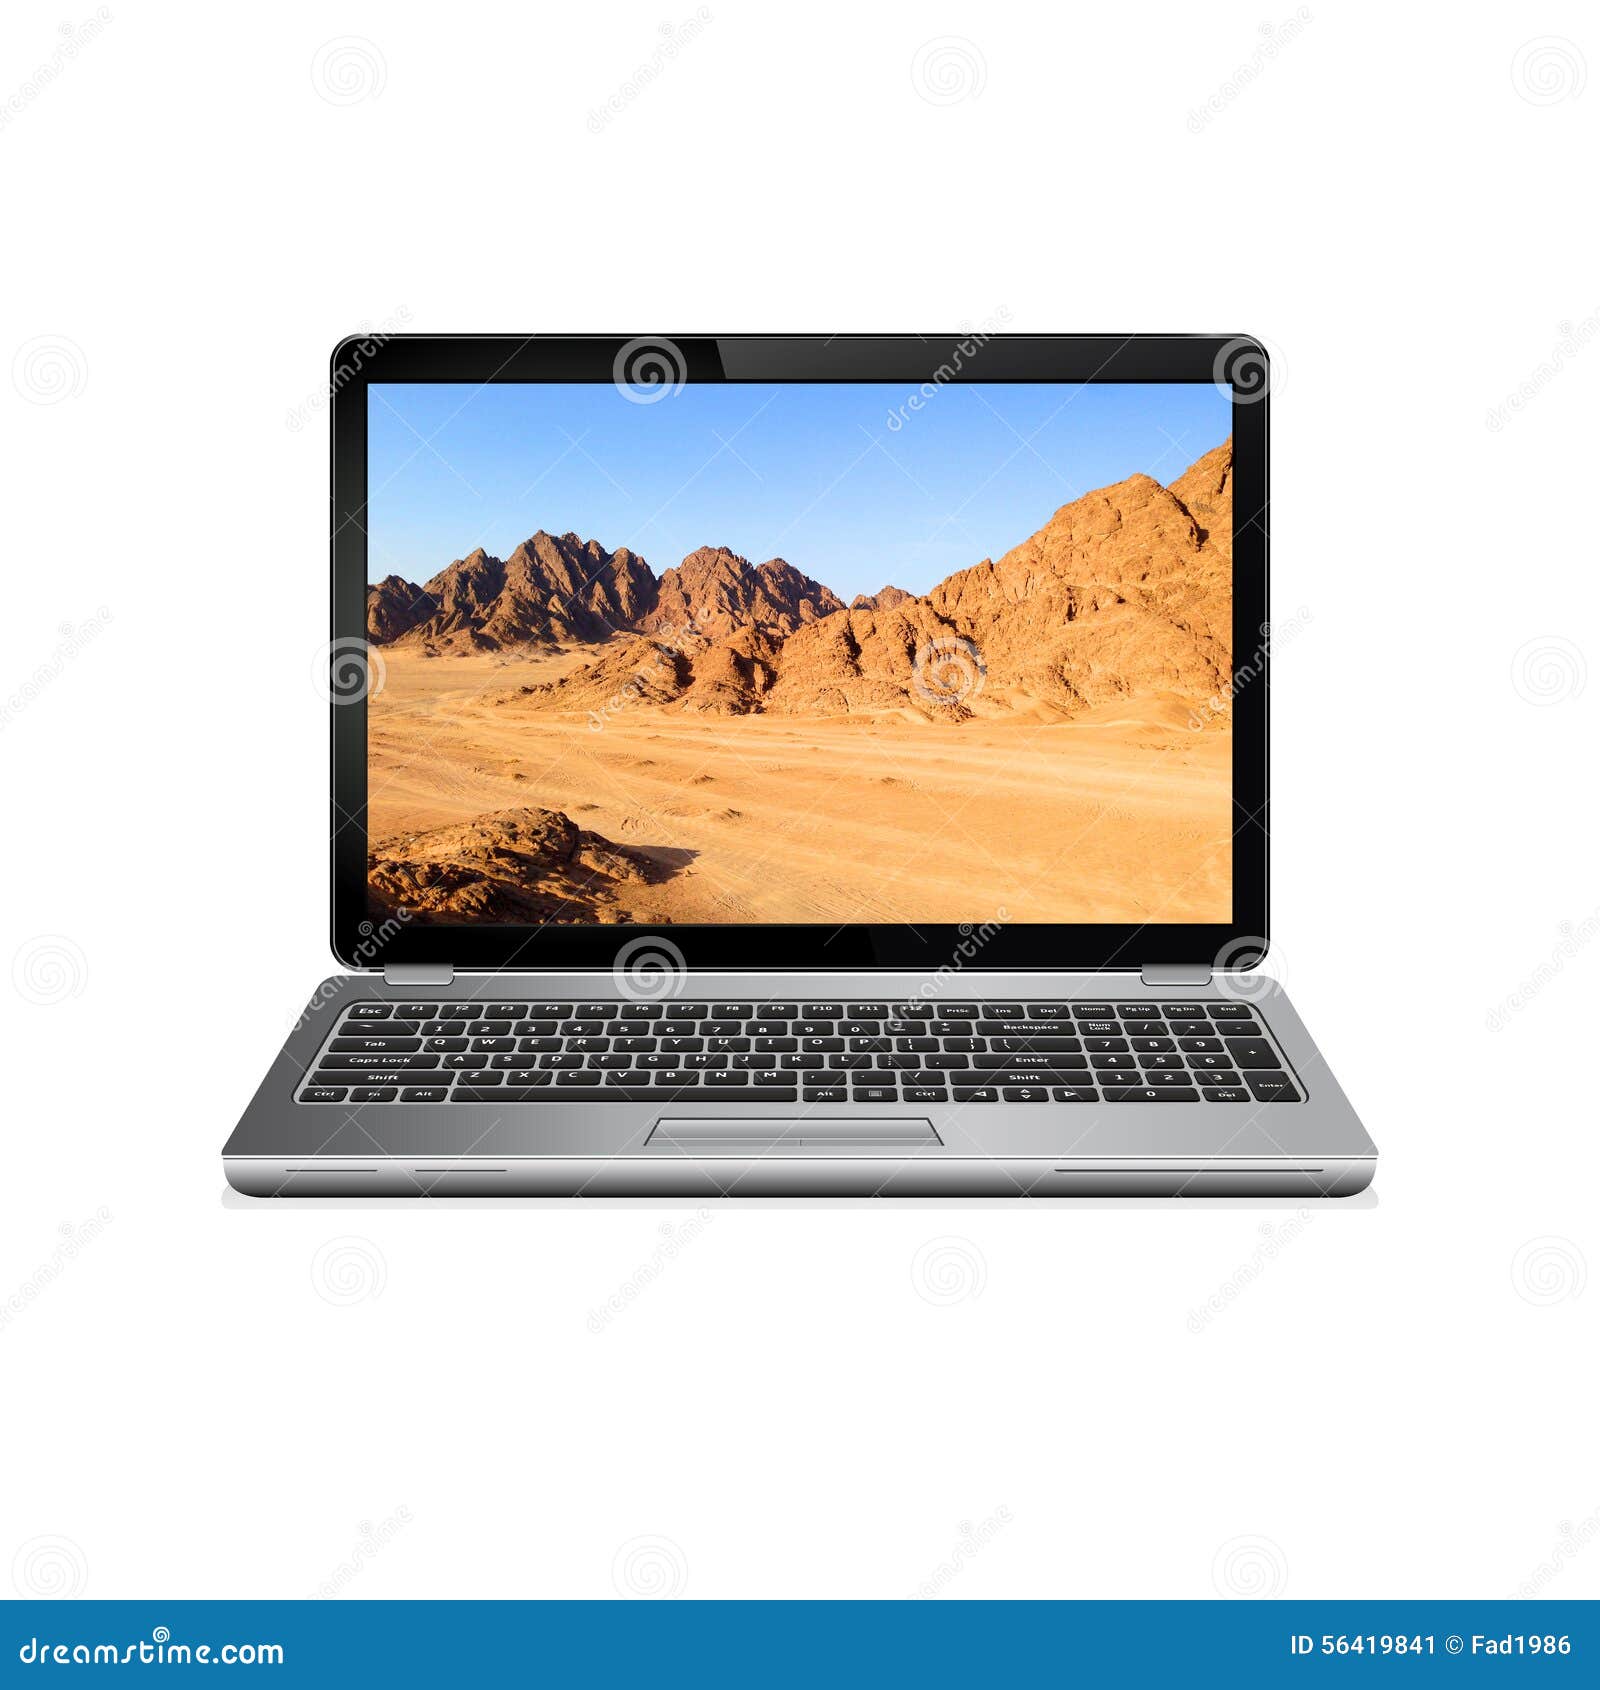 Laptop with Wallpaper on Screen Stock Image - Image of hill, landscape:  56419841